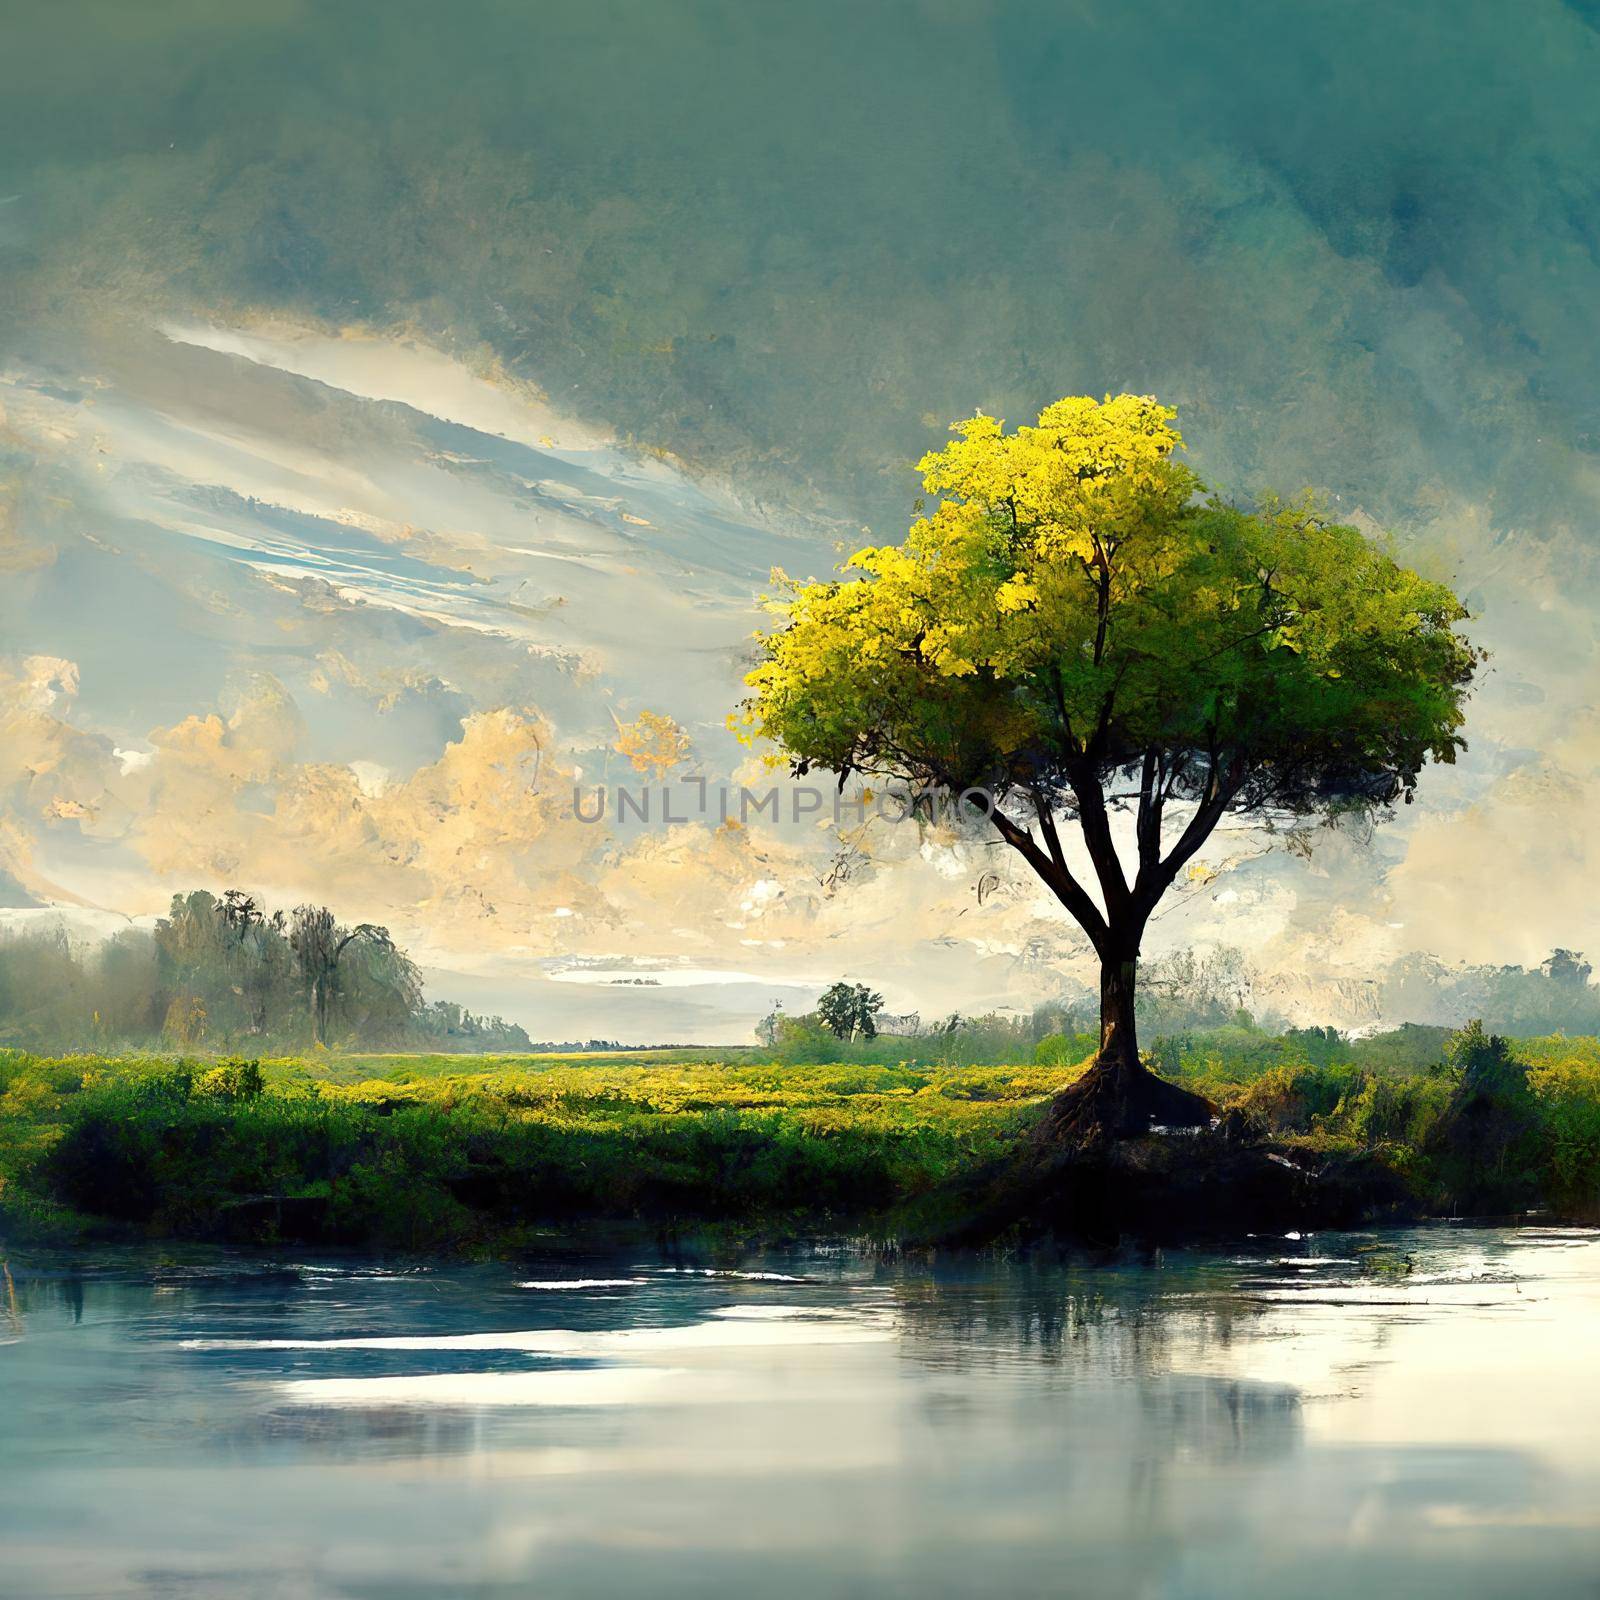 Digital painting of a peaceful nature scene, Illustration by Farcas